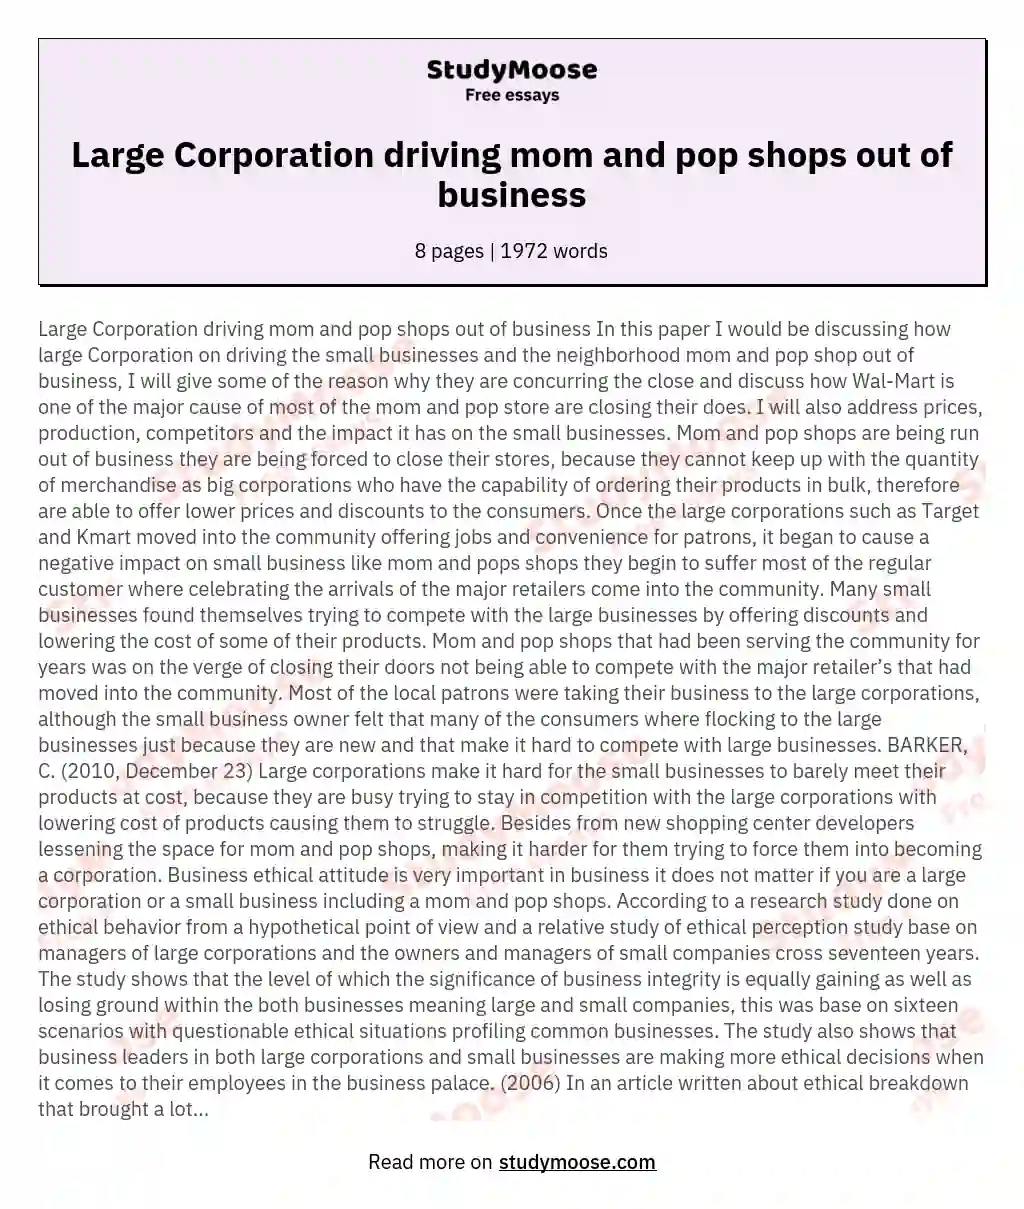 Large Corporation driving mom and pop shops out of business